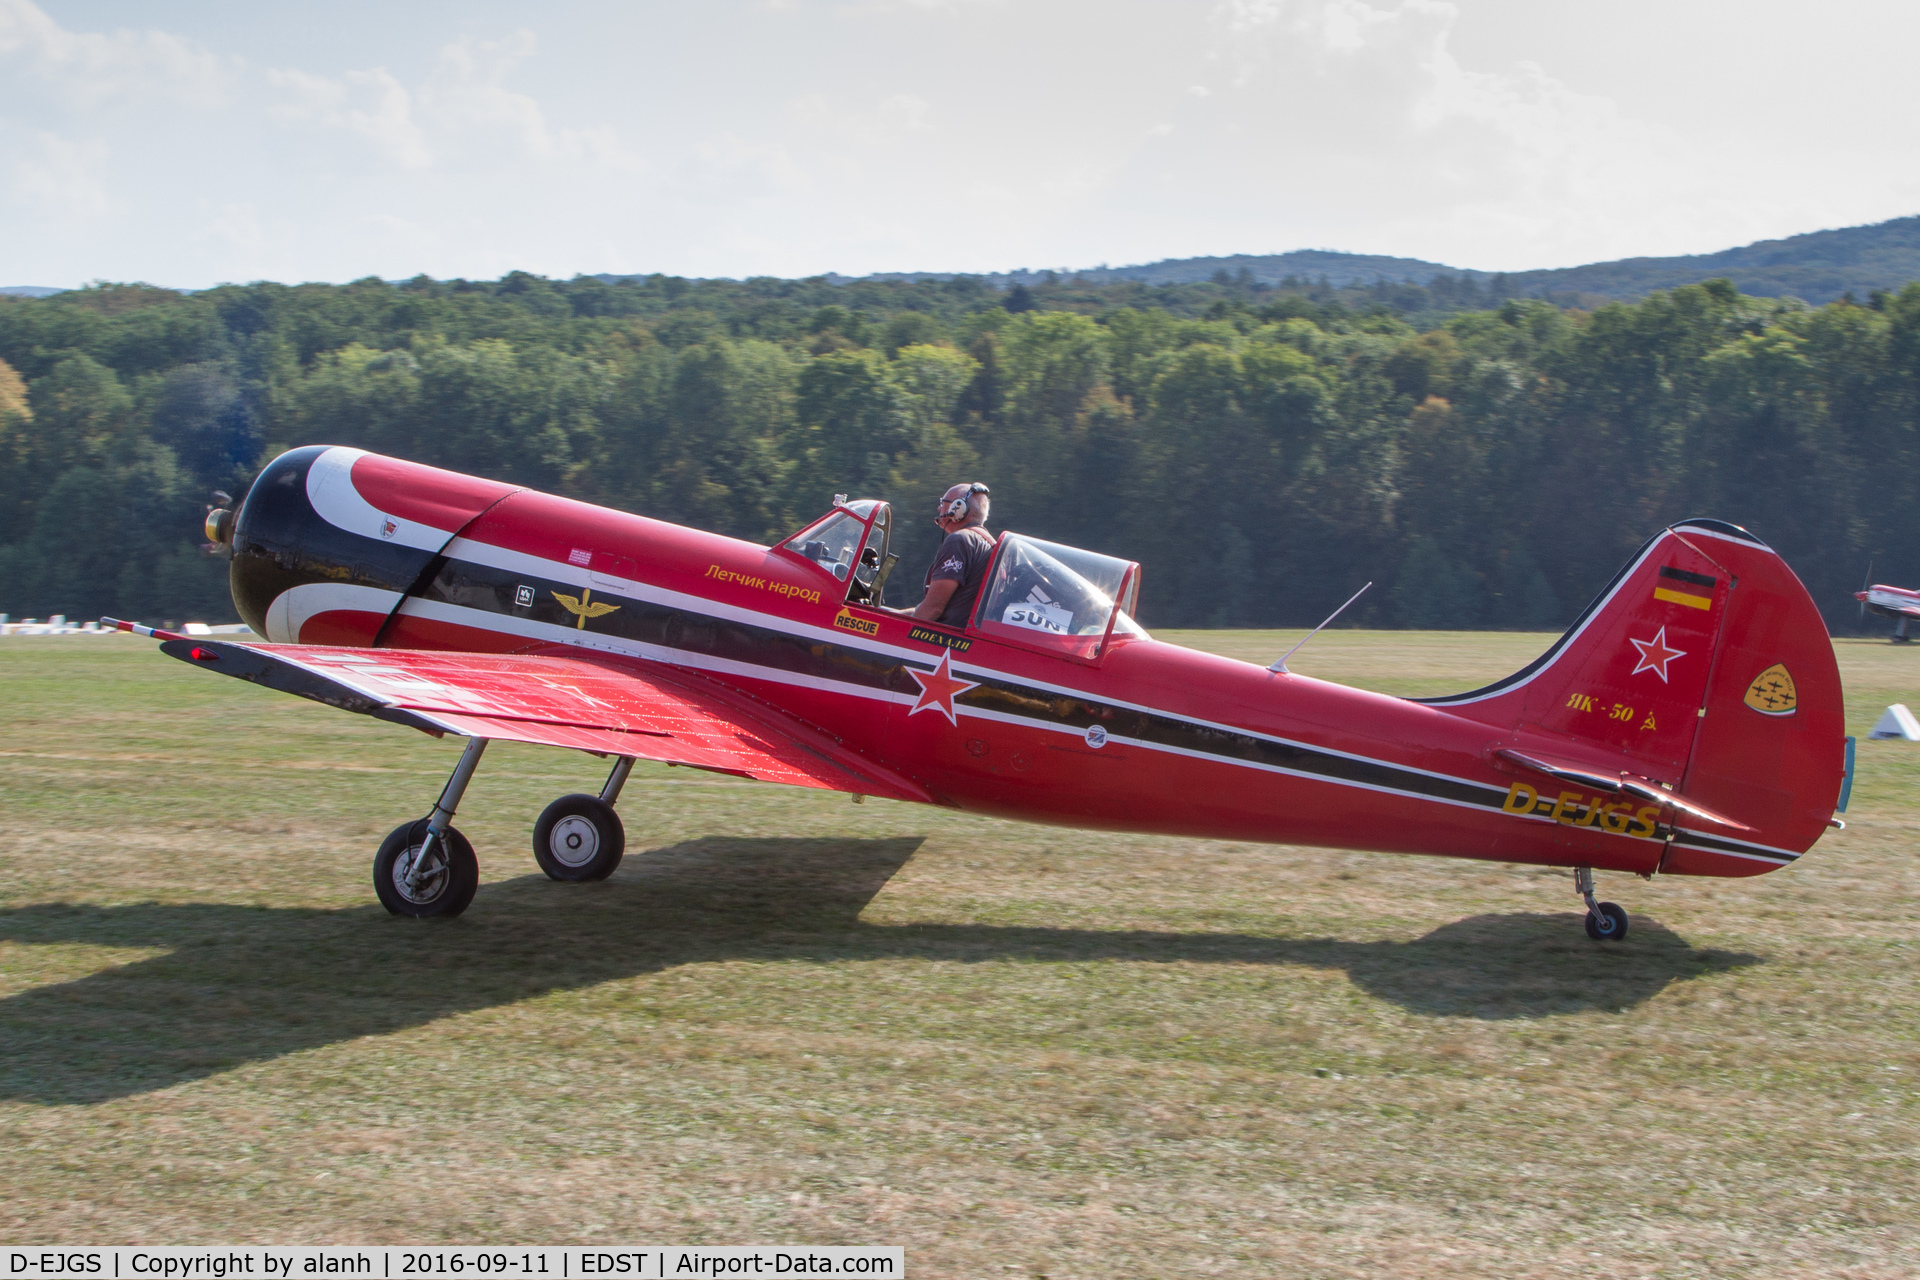 D-EJGS, 1979 Yakovlev Yak-50 C/N 791505, Taxying for departure at the 2016 Hahnweide Oldtimer Fliegertreffen. Note the pilot trying to see past that engine!